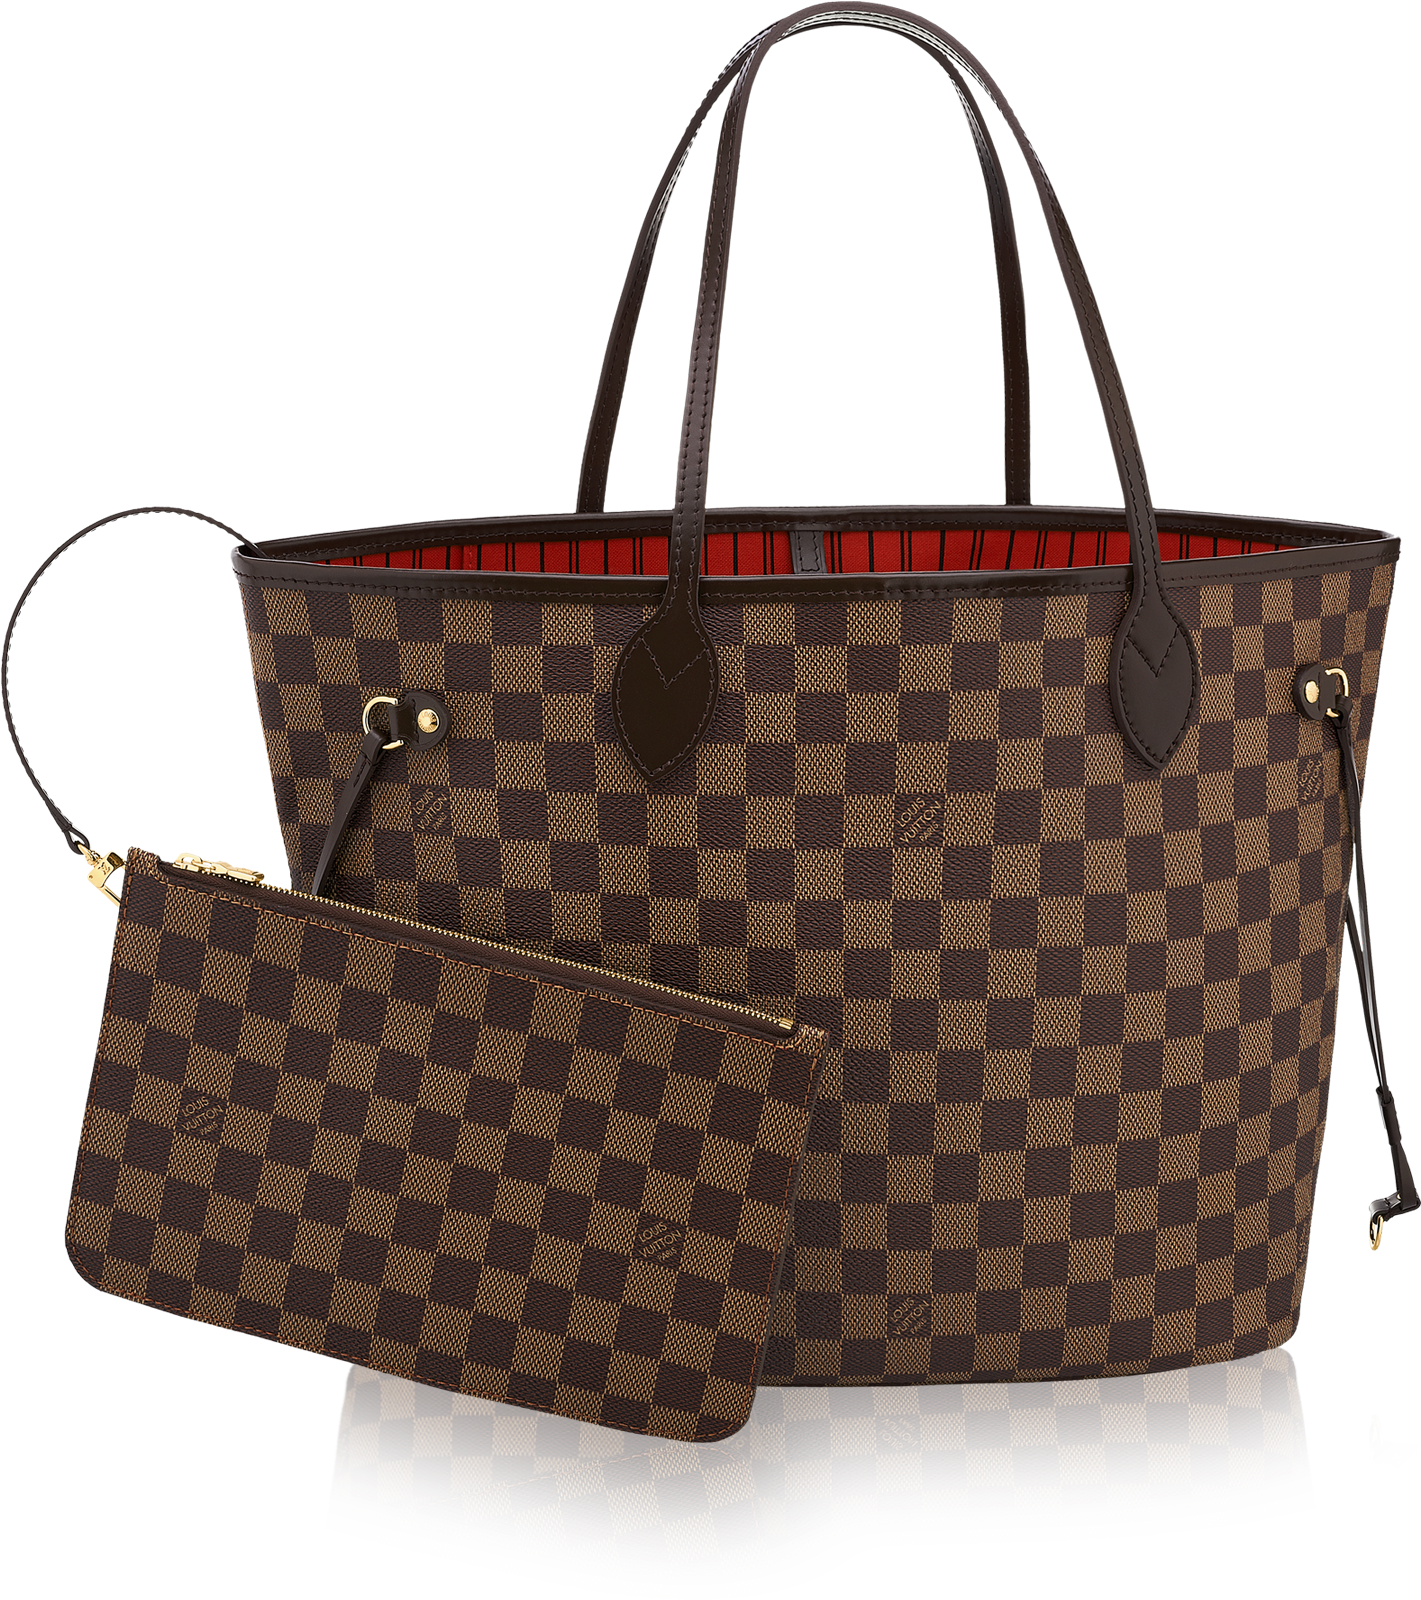 Brown Louis Vuitton Purse PNG Image Background